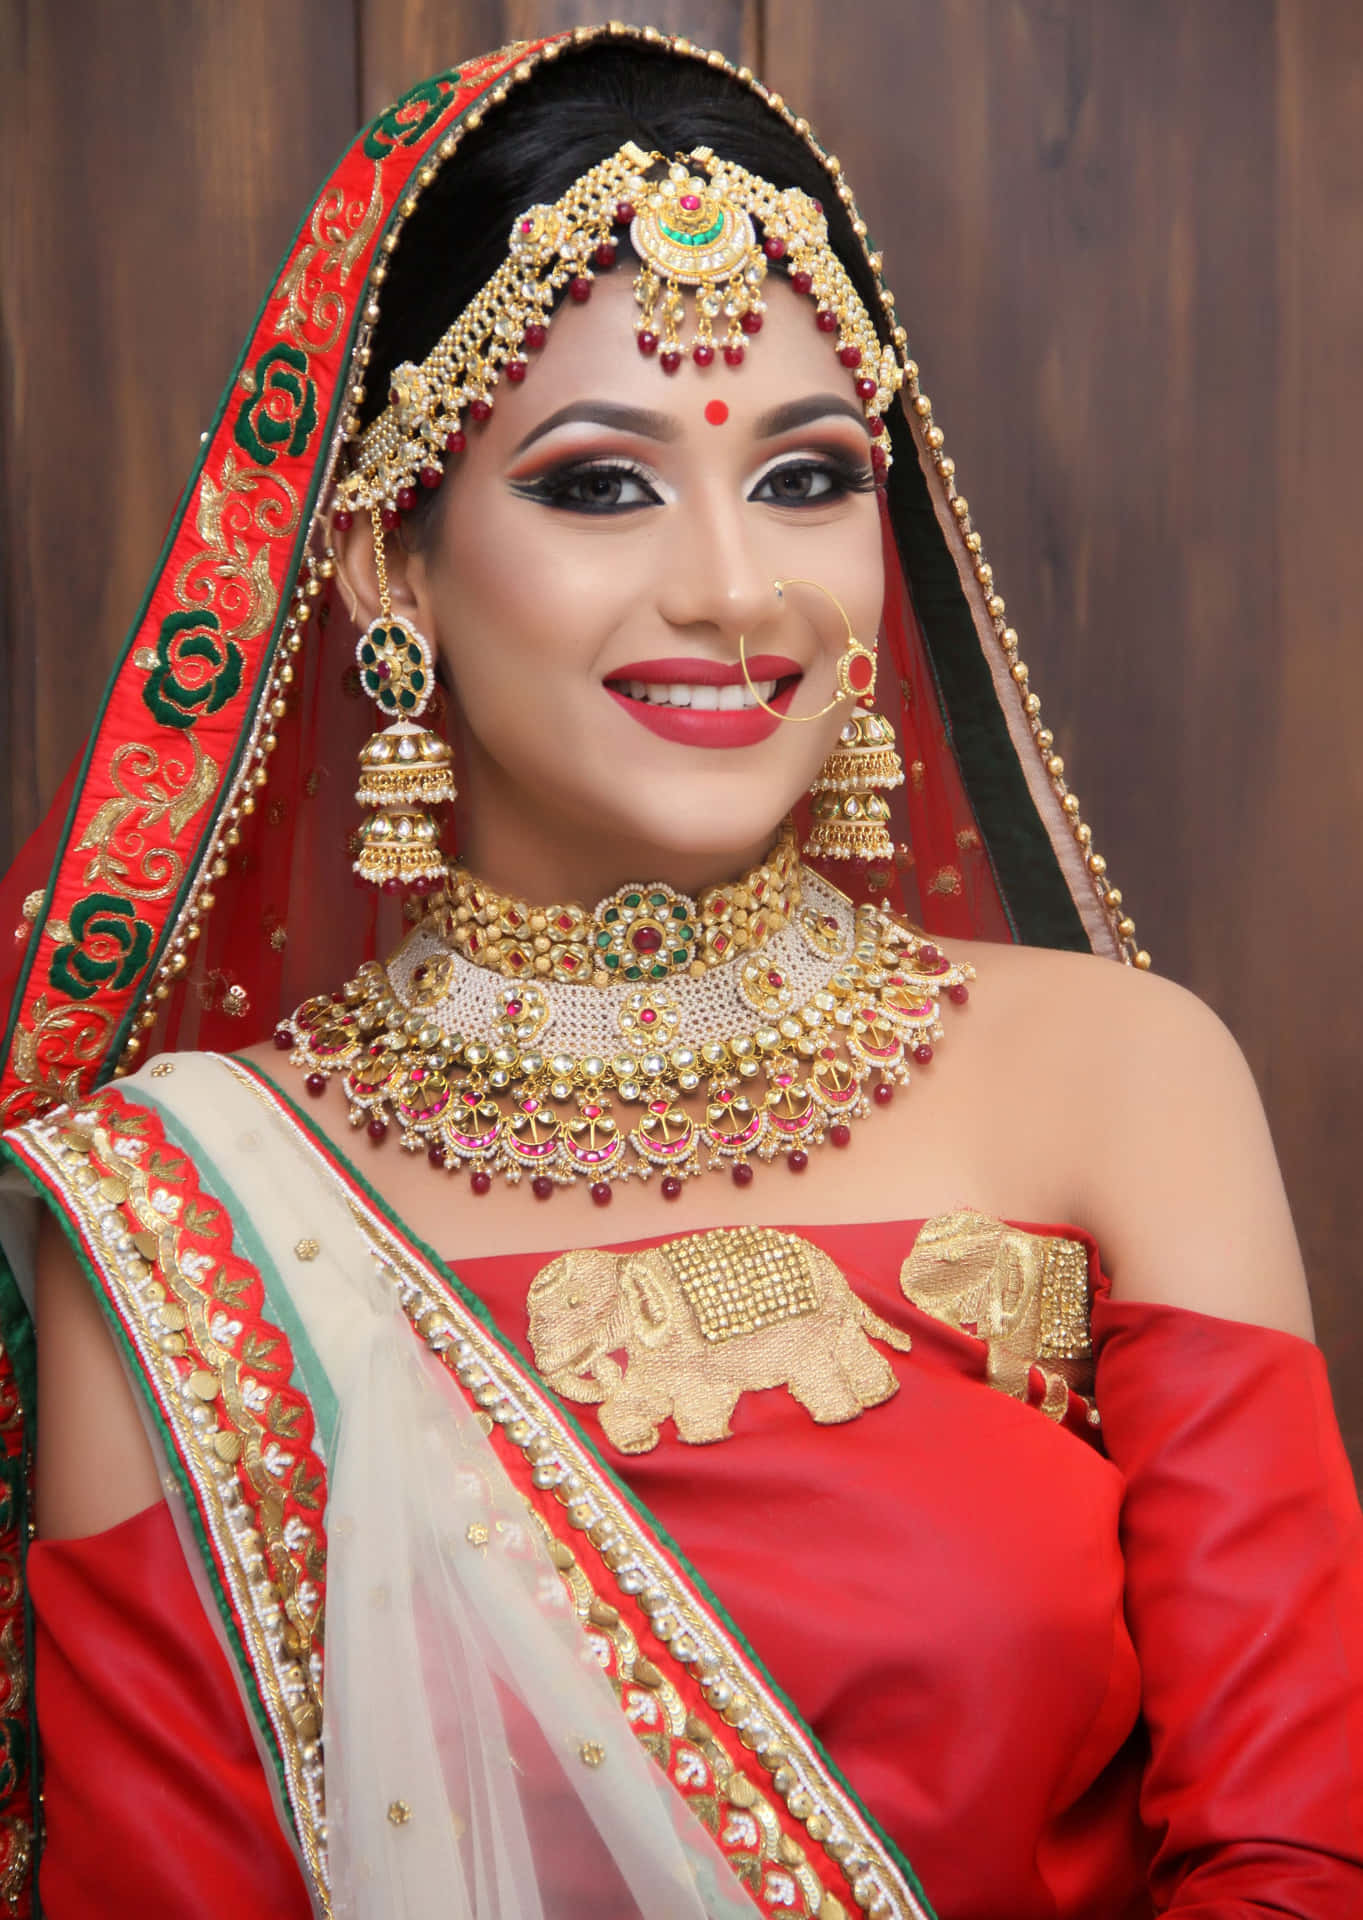 Download Indian Bride Pictures 3168 X 4463 | Wallpapers.com